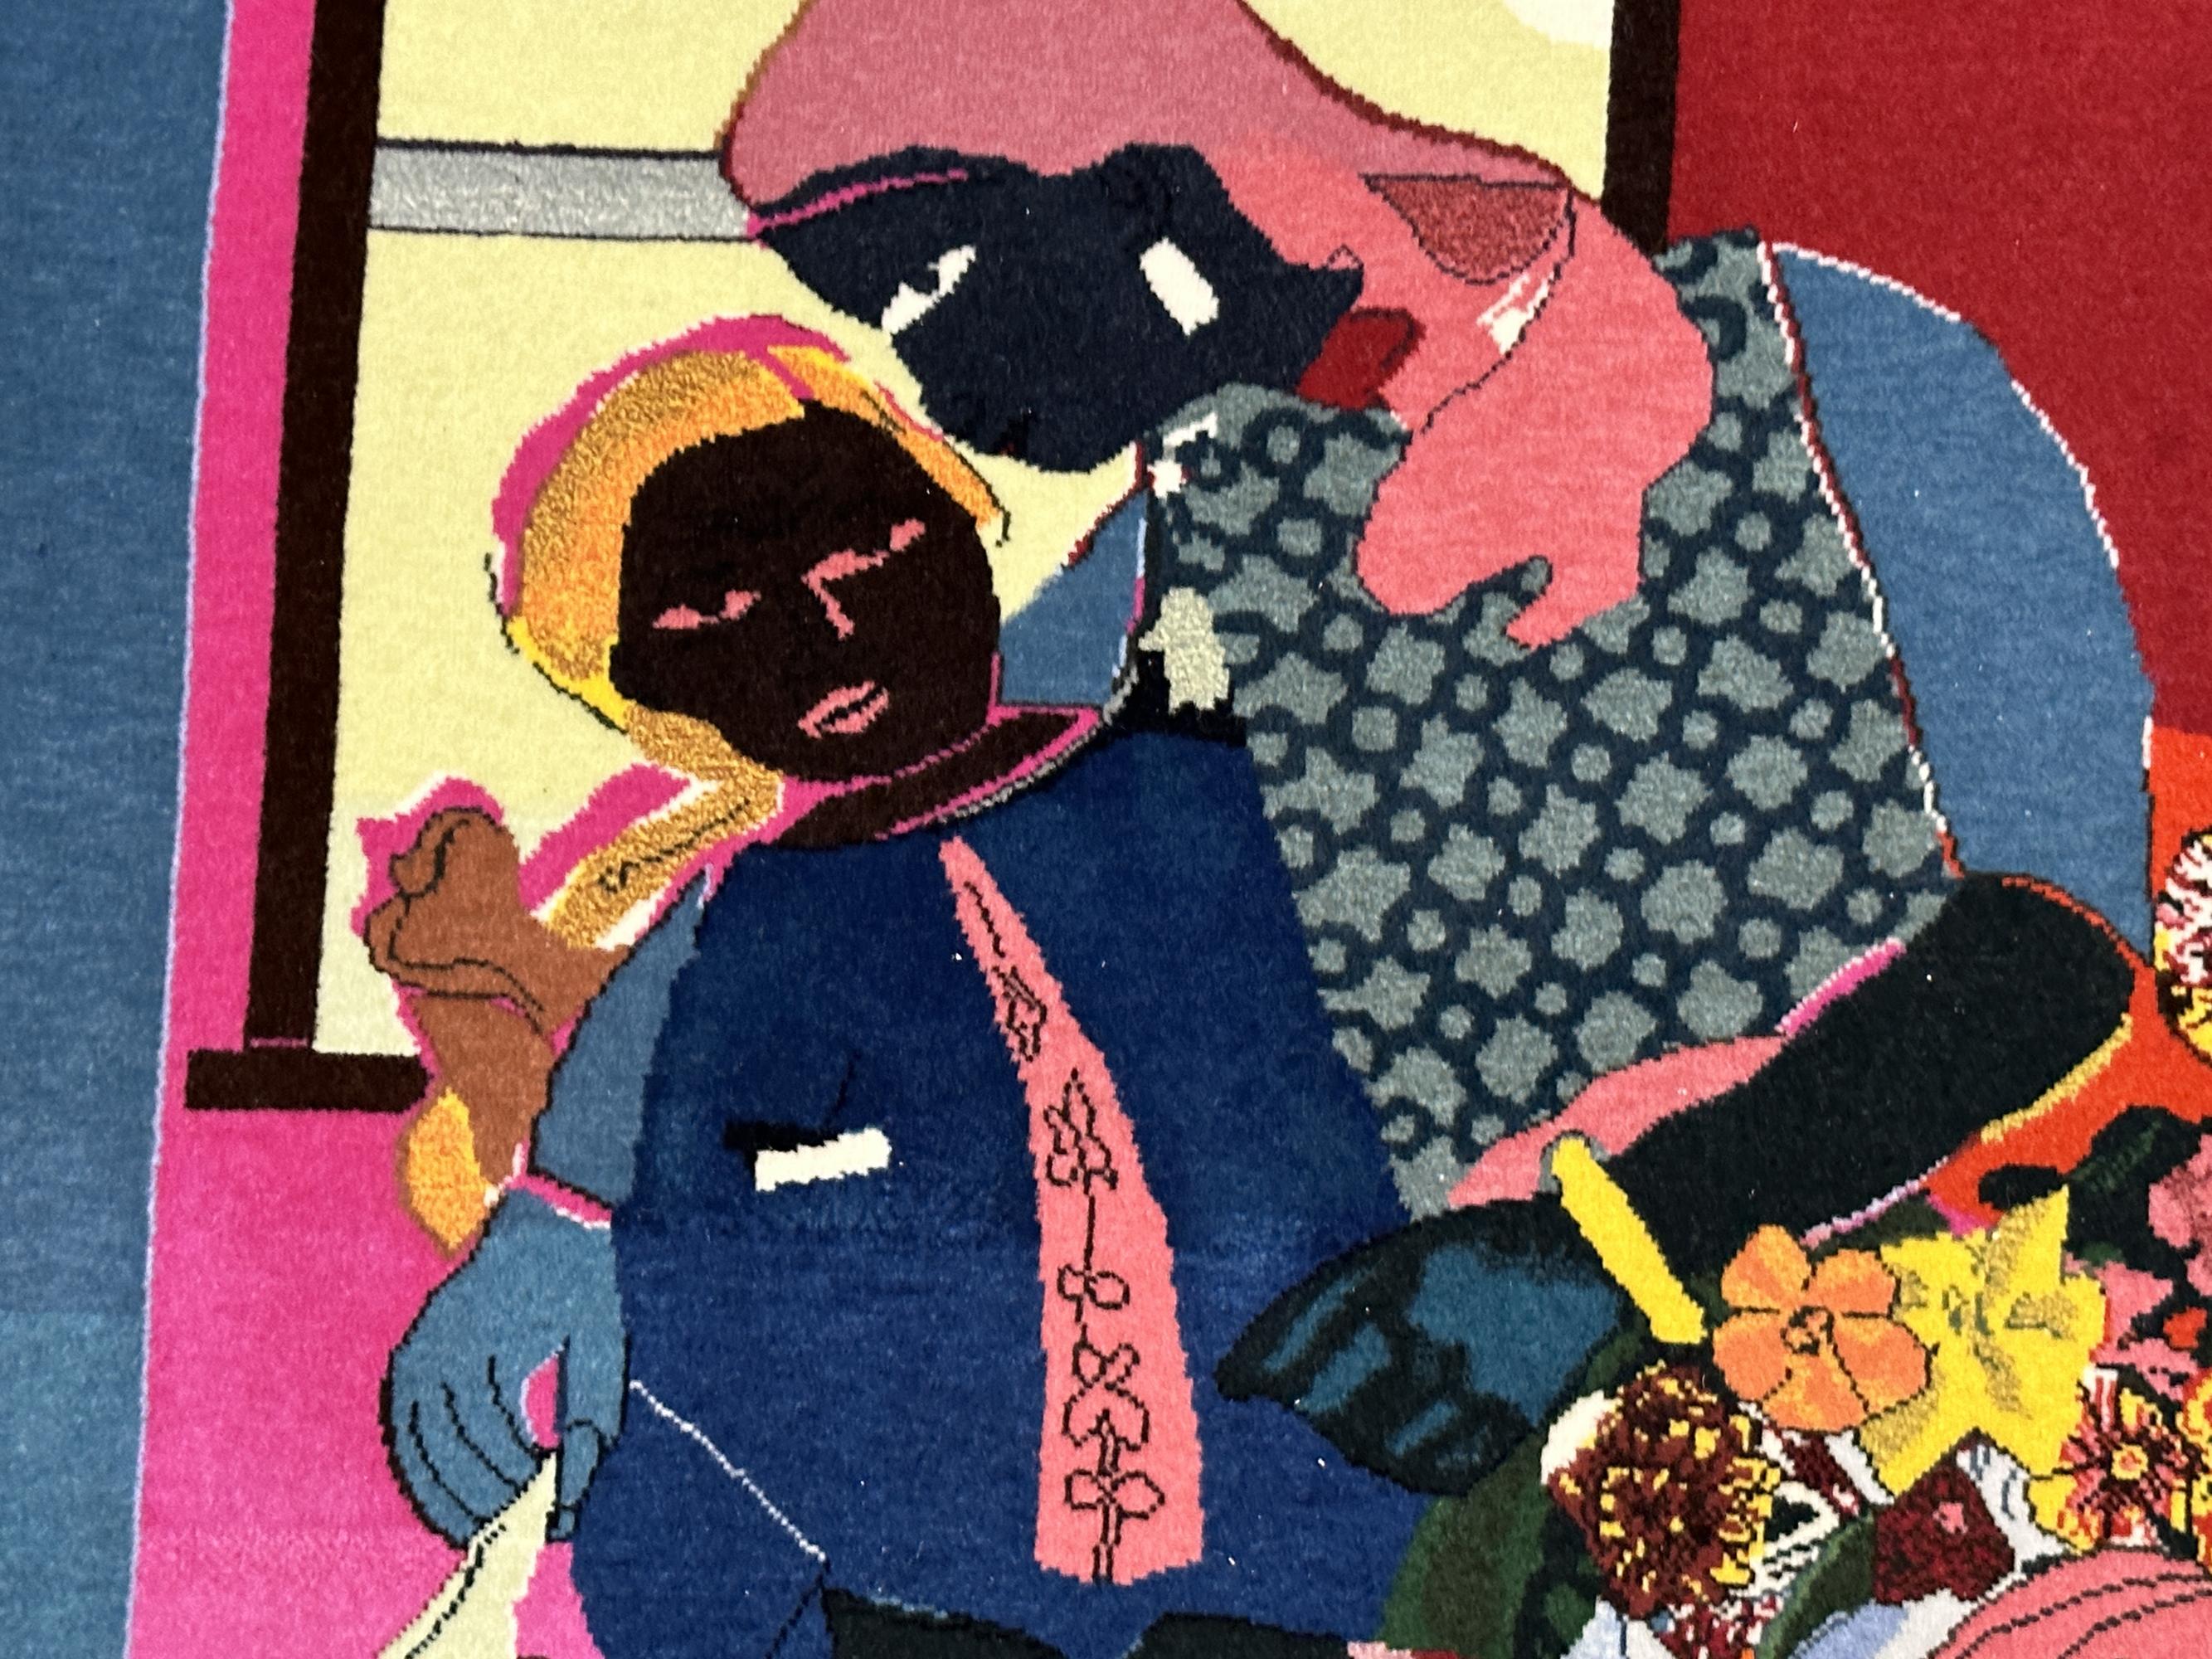 Romare Bearden
Mourning ~ Hand Woven Textile - 1980
Textile - Tapestry   49'' x 35'' in
Hand-made Wool Tapestry made in Tabriz style.